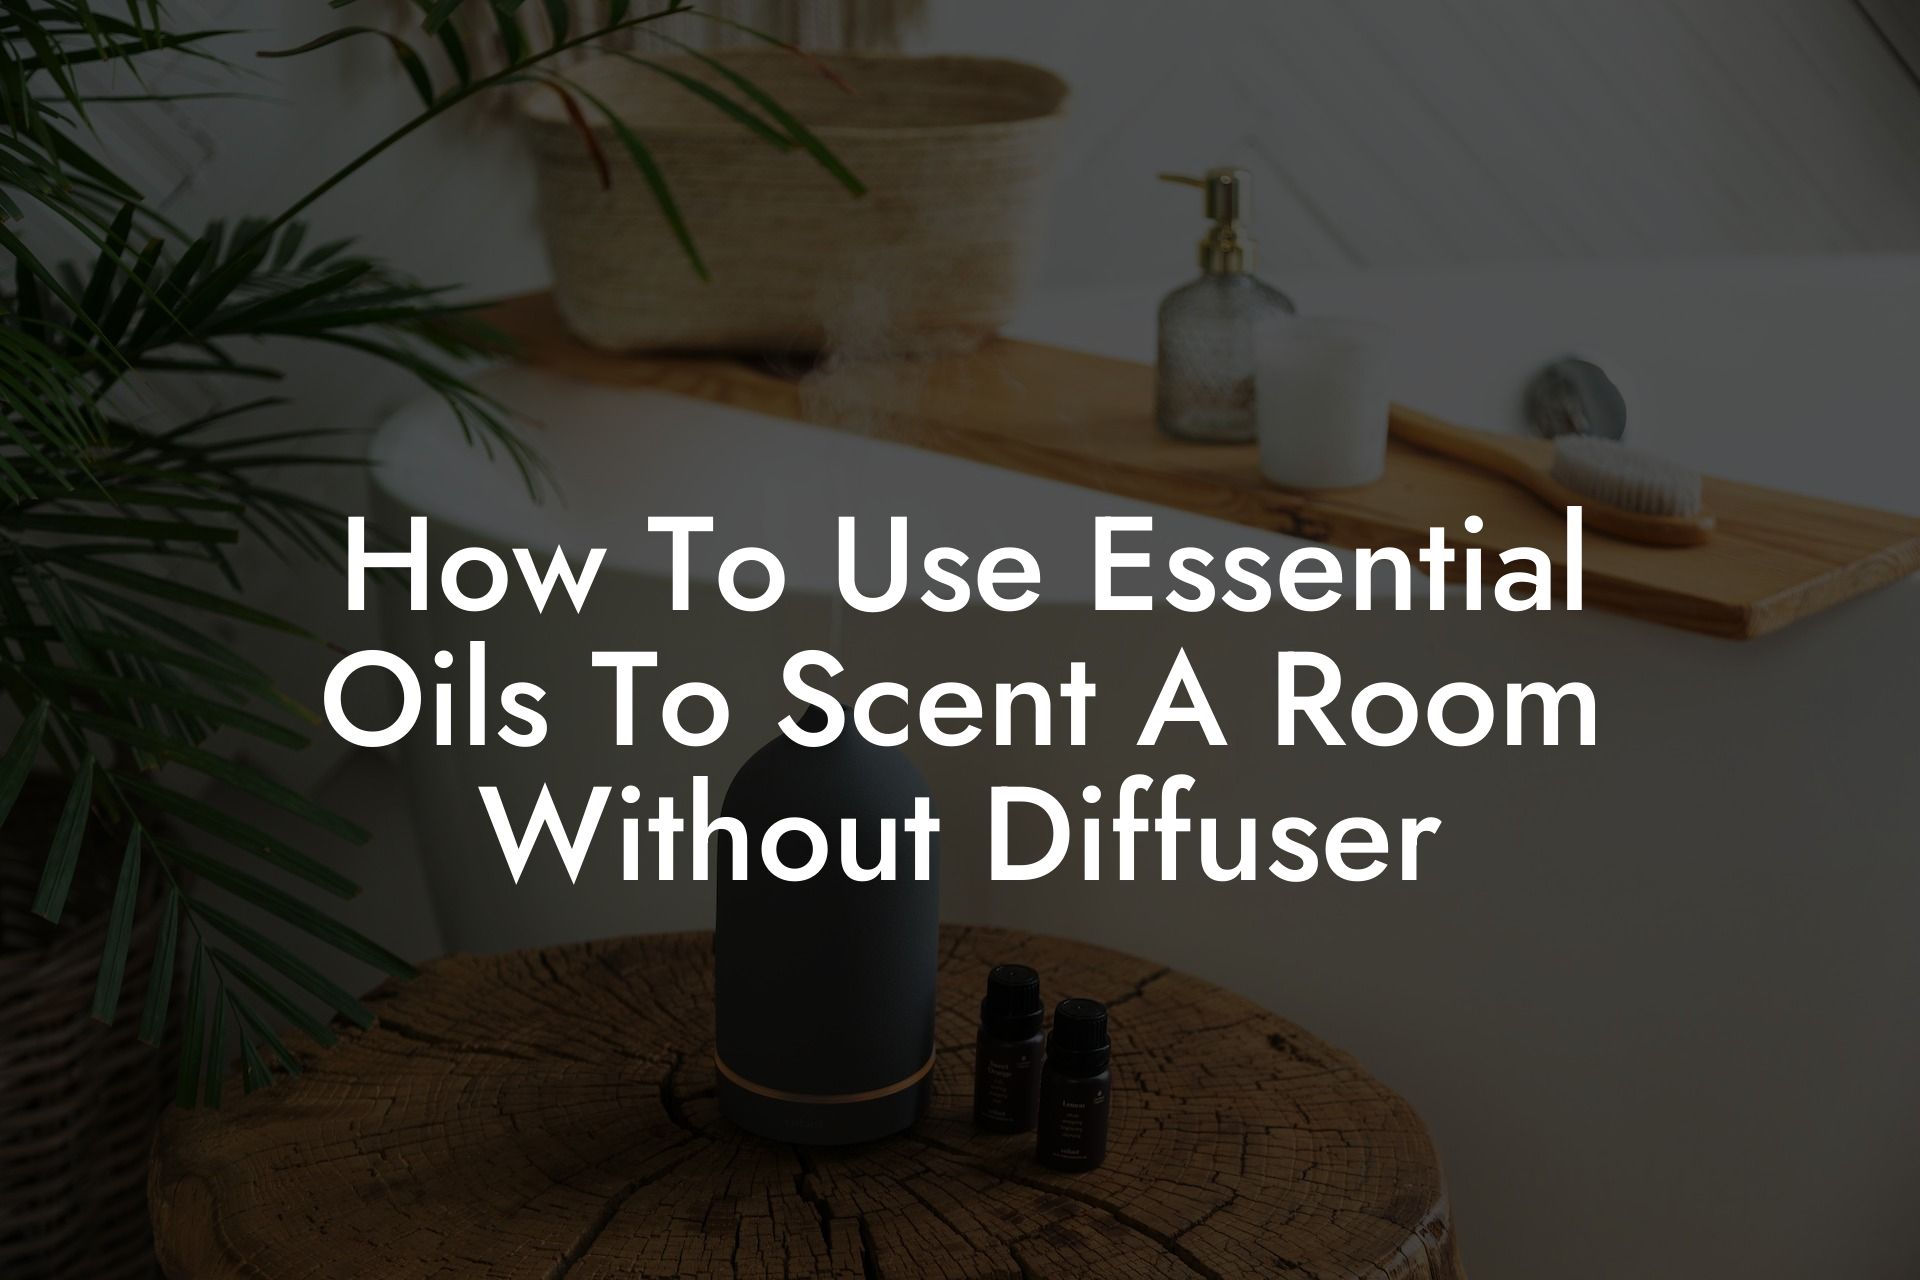 How To Use Essential Oils To Scent A Room Without Diffuser